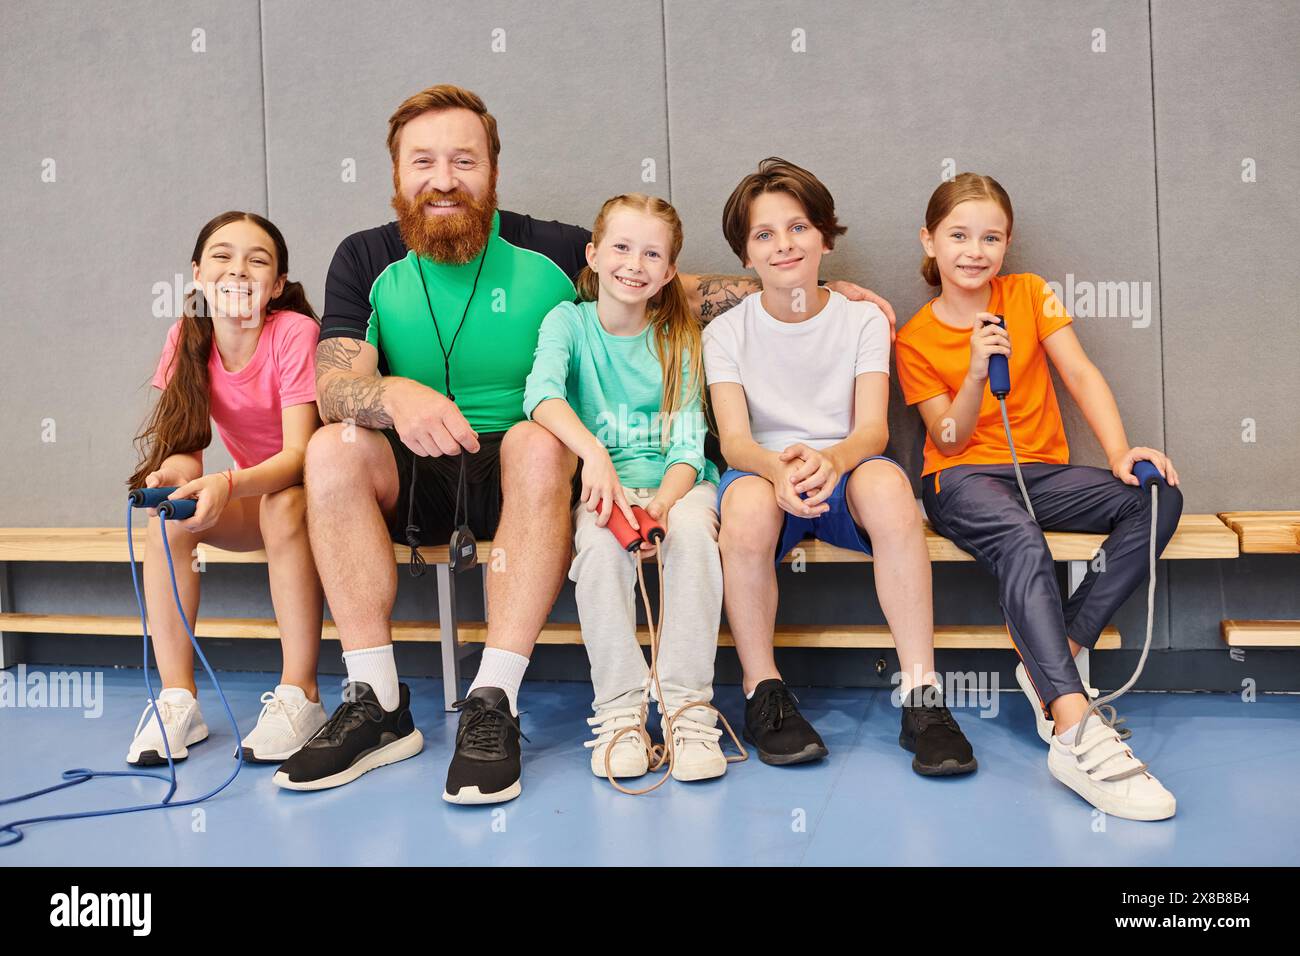 A man with a beard, a teacher, sitting on a bench surrounded by happy, diverse children of various ages, engaging in conversation and learning togethe Stock Photo